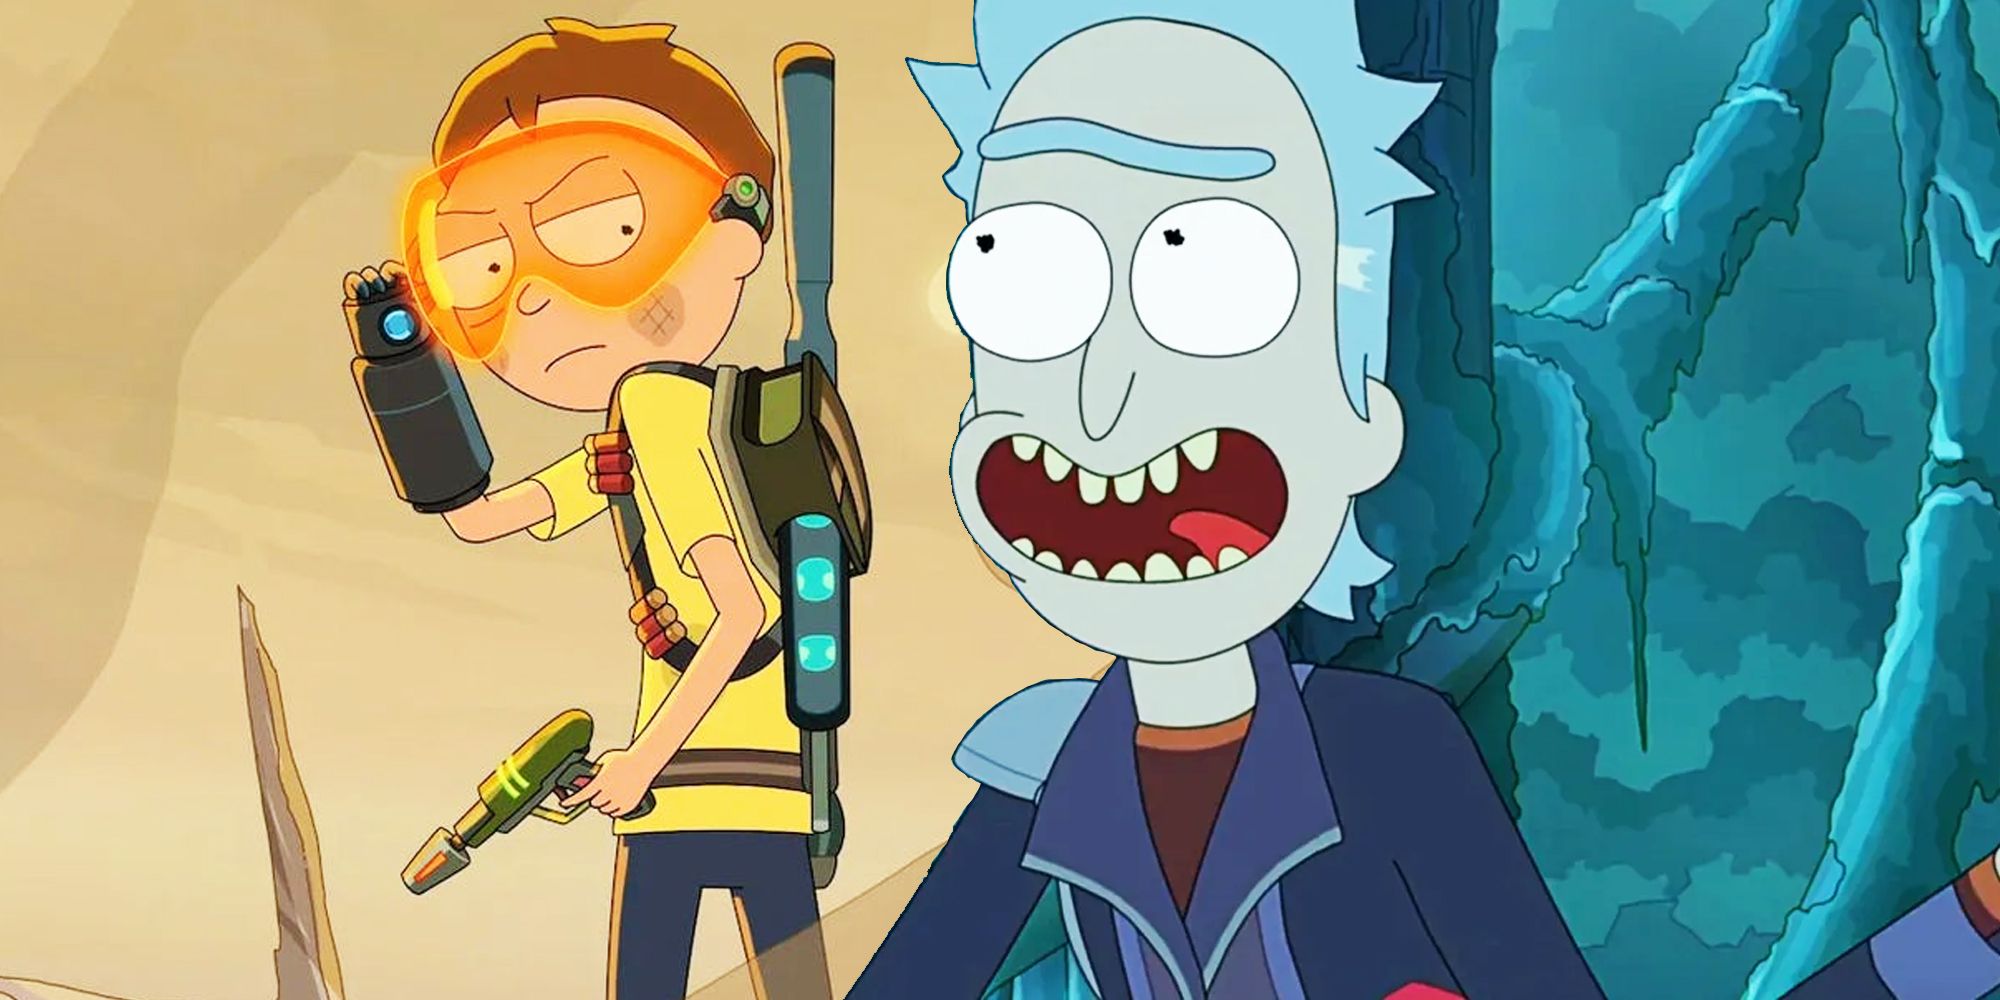 Rick Prime and Evil Morty from Rick and Morty